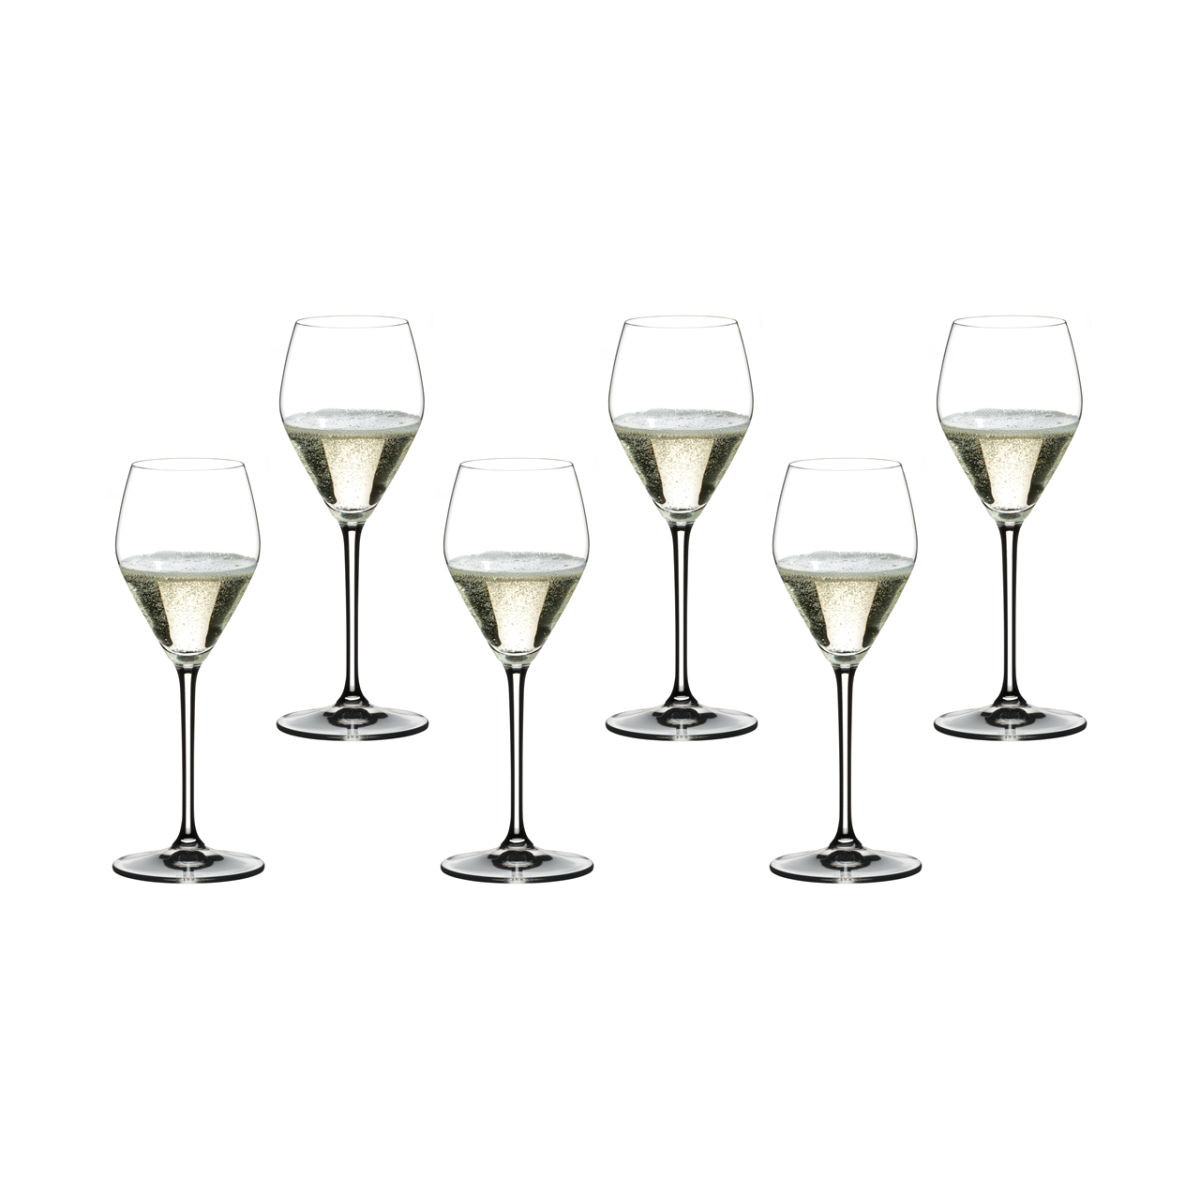 Riedel Extreme Prosecco 6er Set